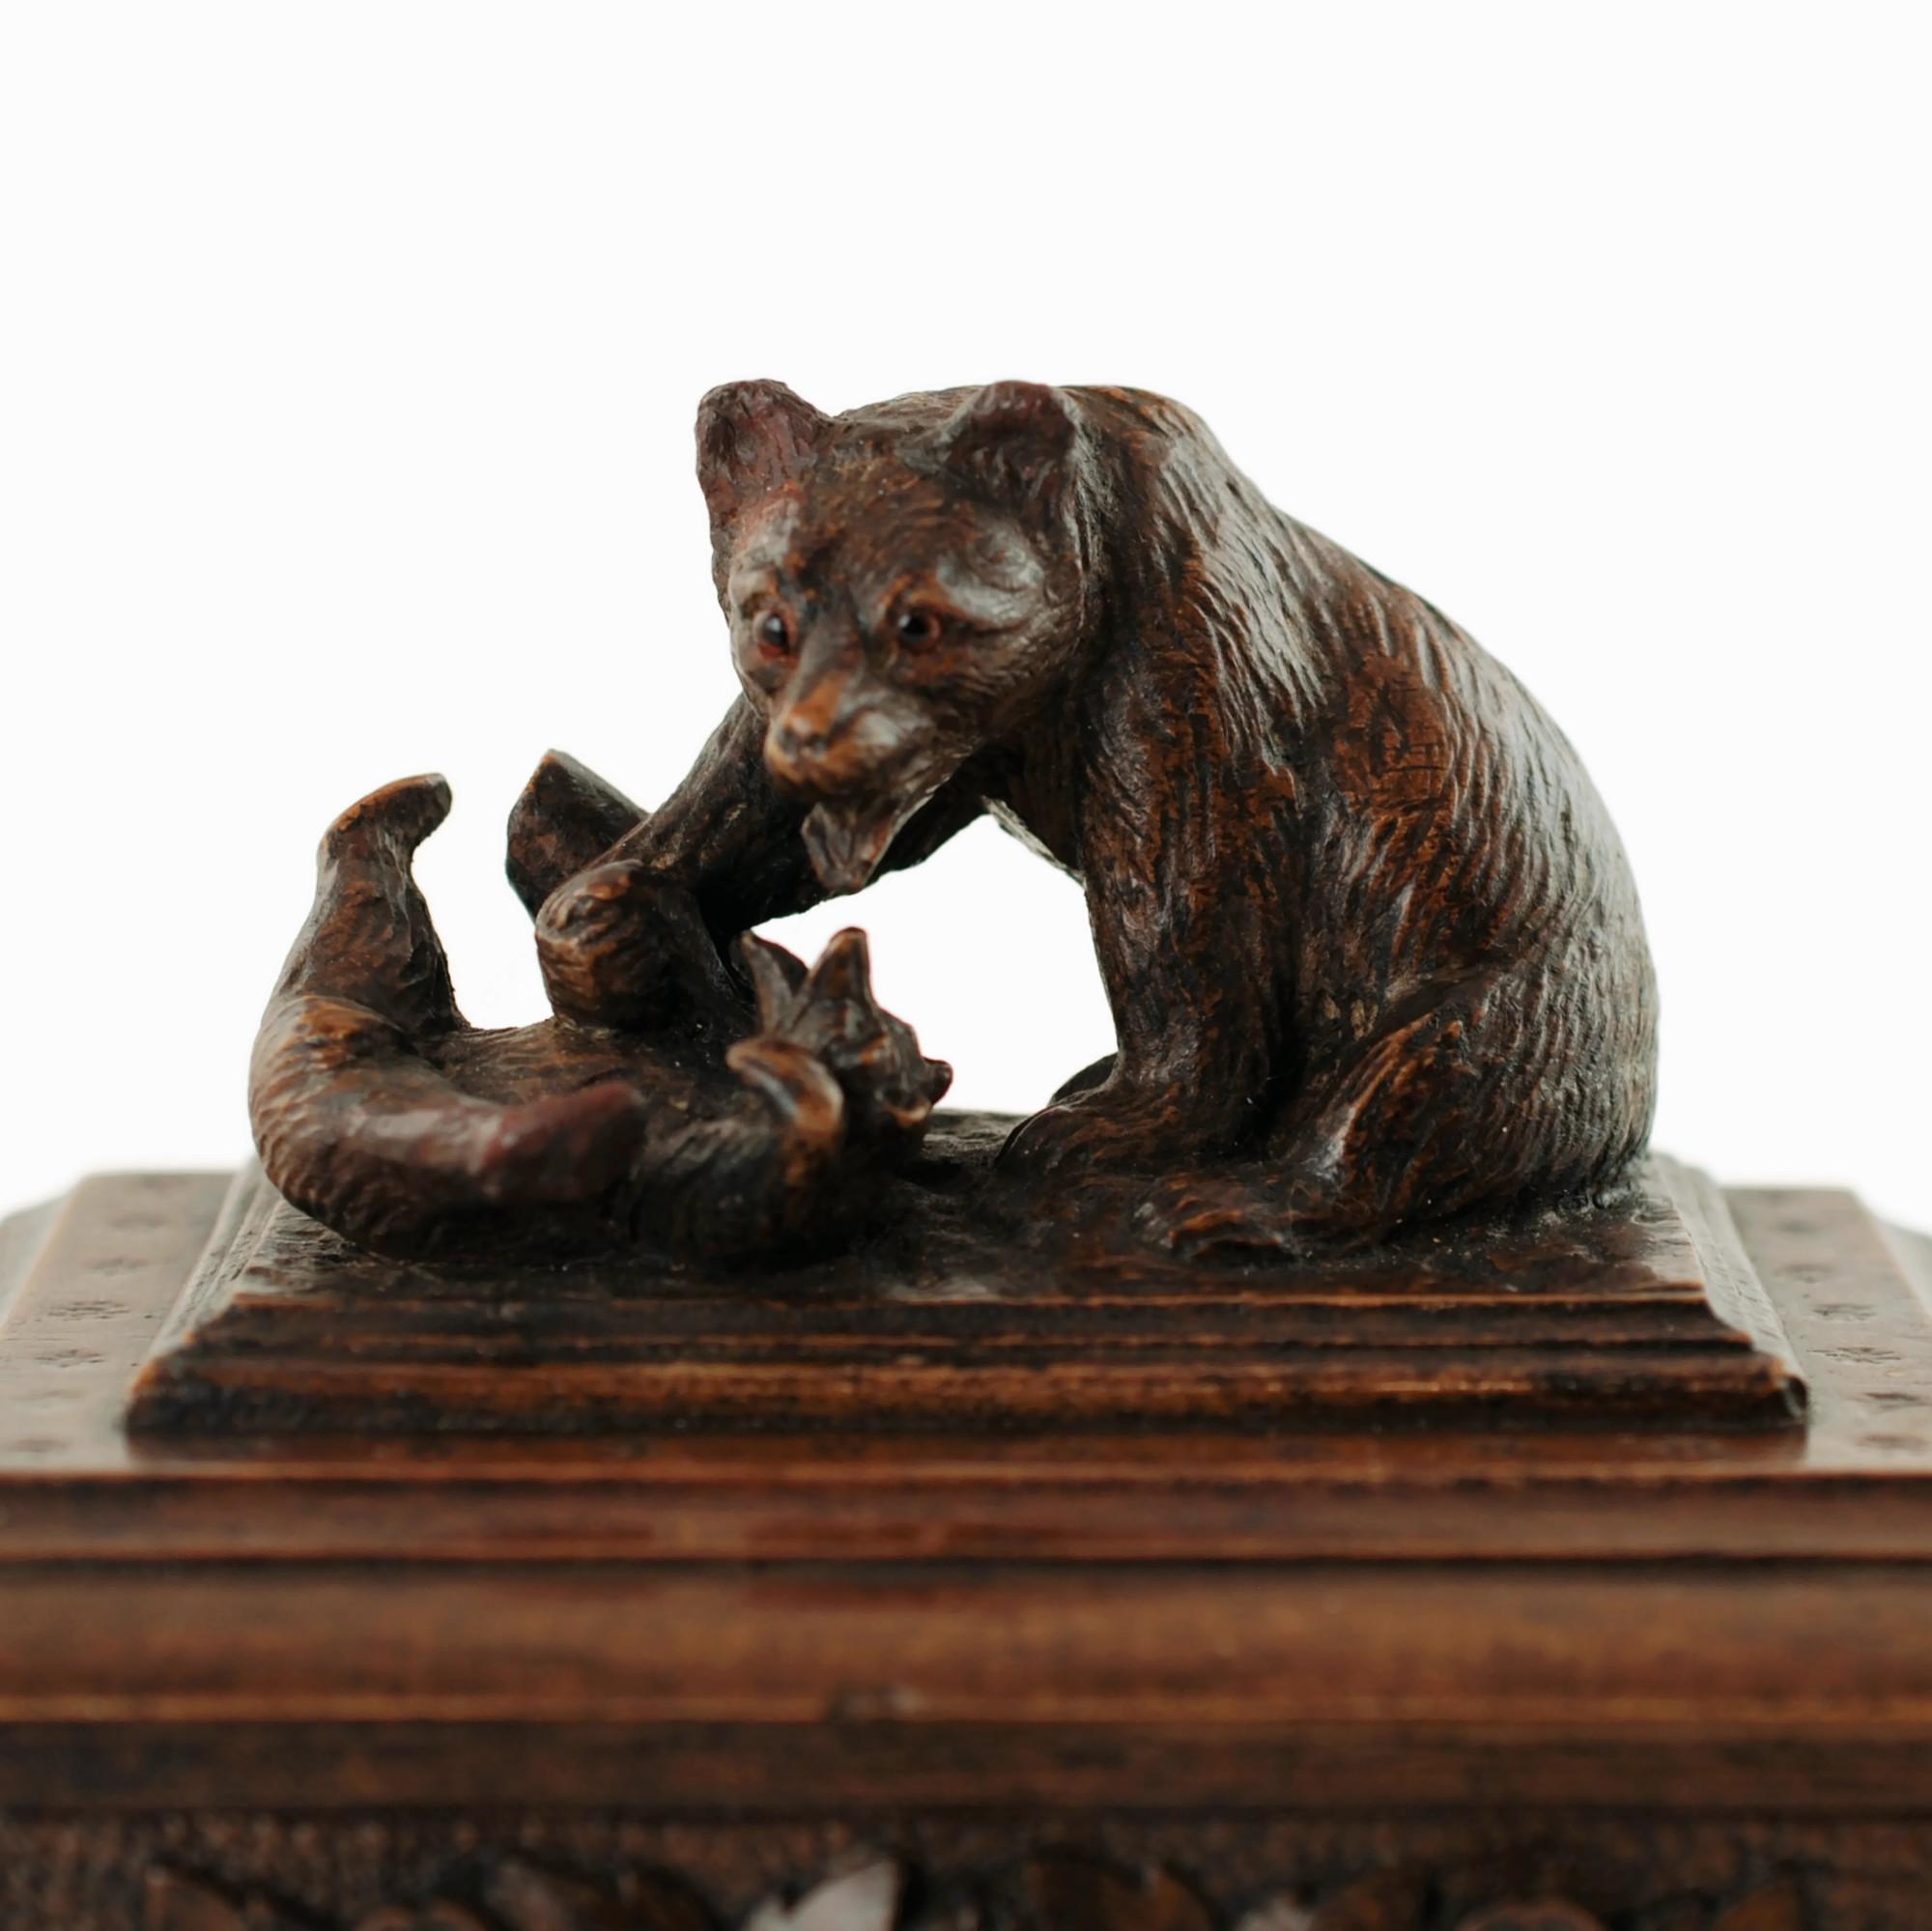 This unusual antique Black Forest box features a pair of fully dimensional bears cavorting at the base of a tree stump. The mother and cub have been finished with a high level of detail including glass eyes in the larger bear's head. The bears are